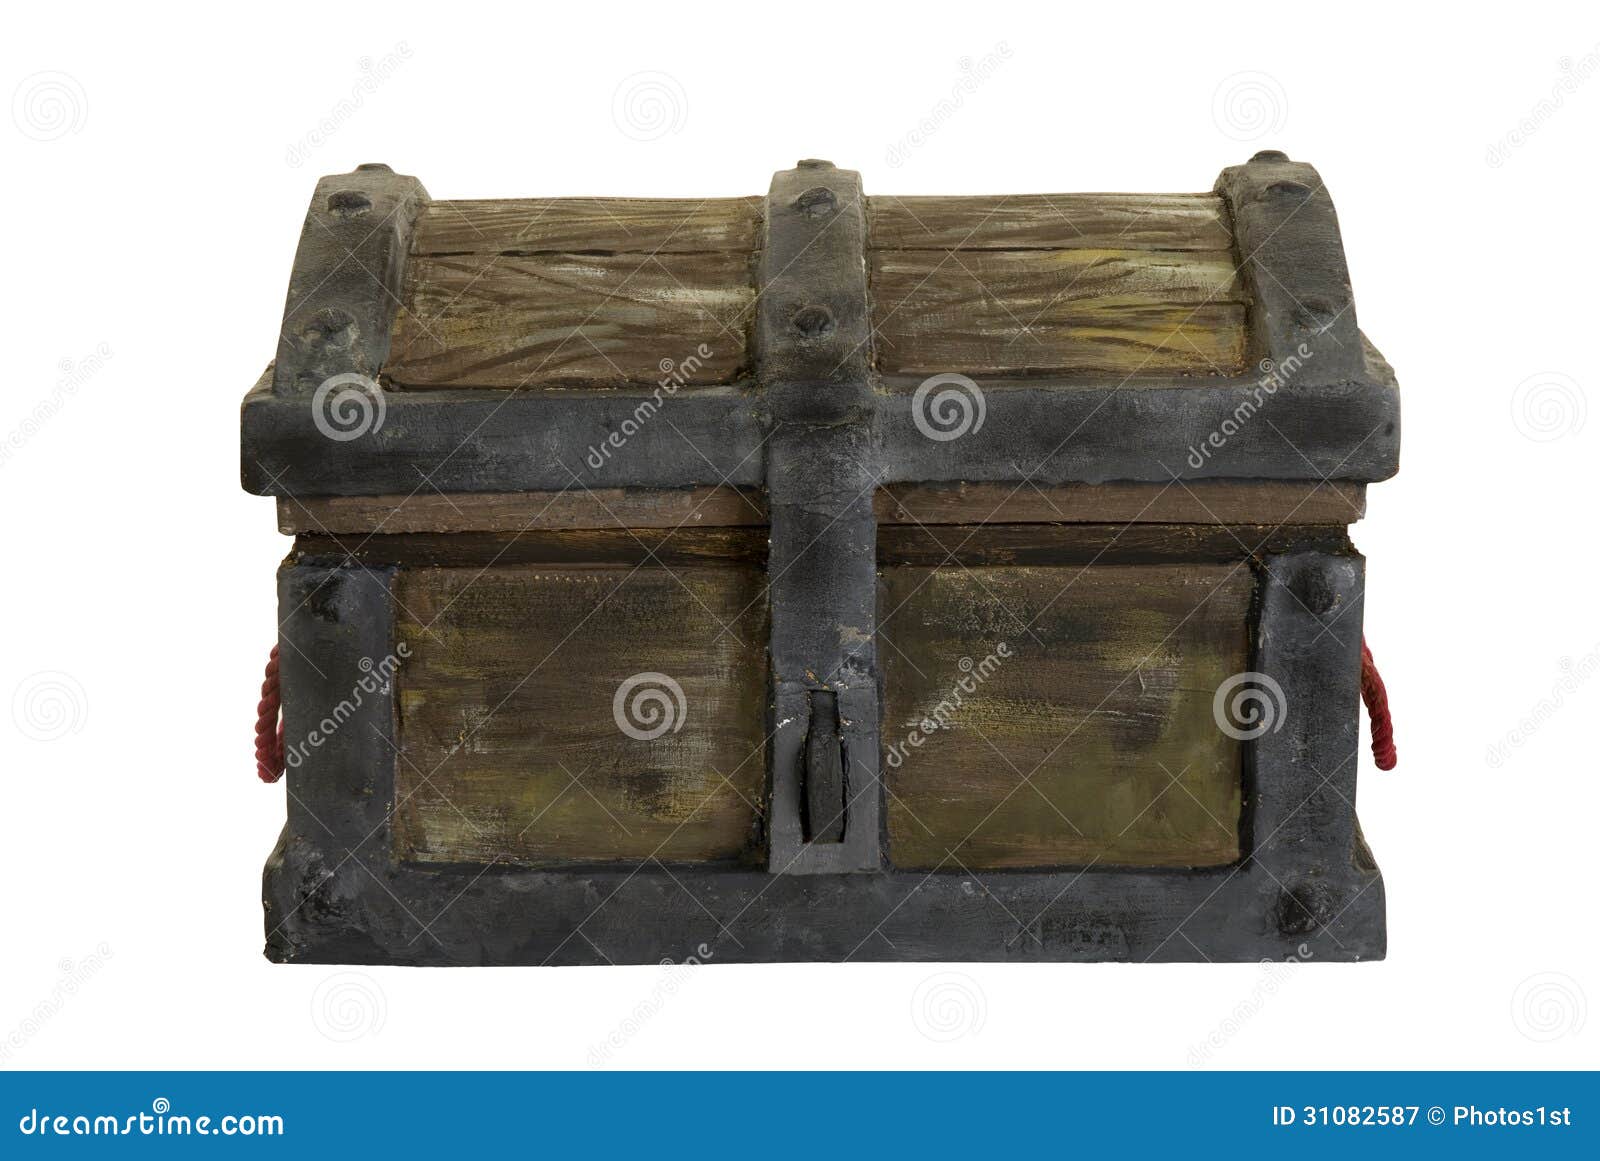 Treasure Chest Royalty Free Stock Photography - Image: 31082587